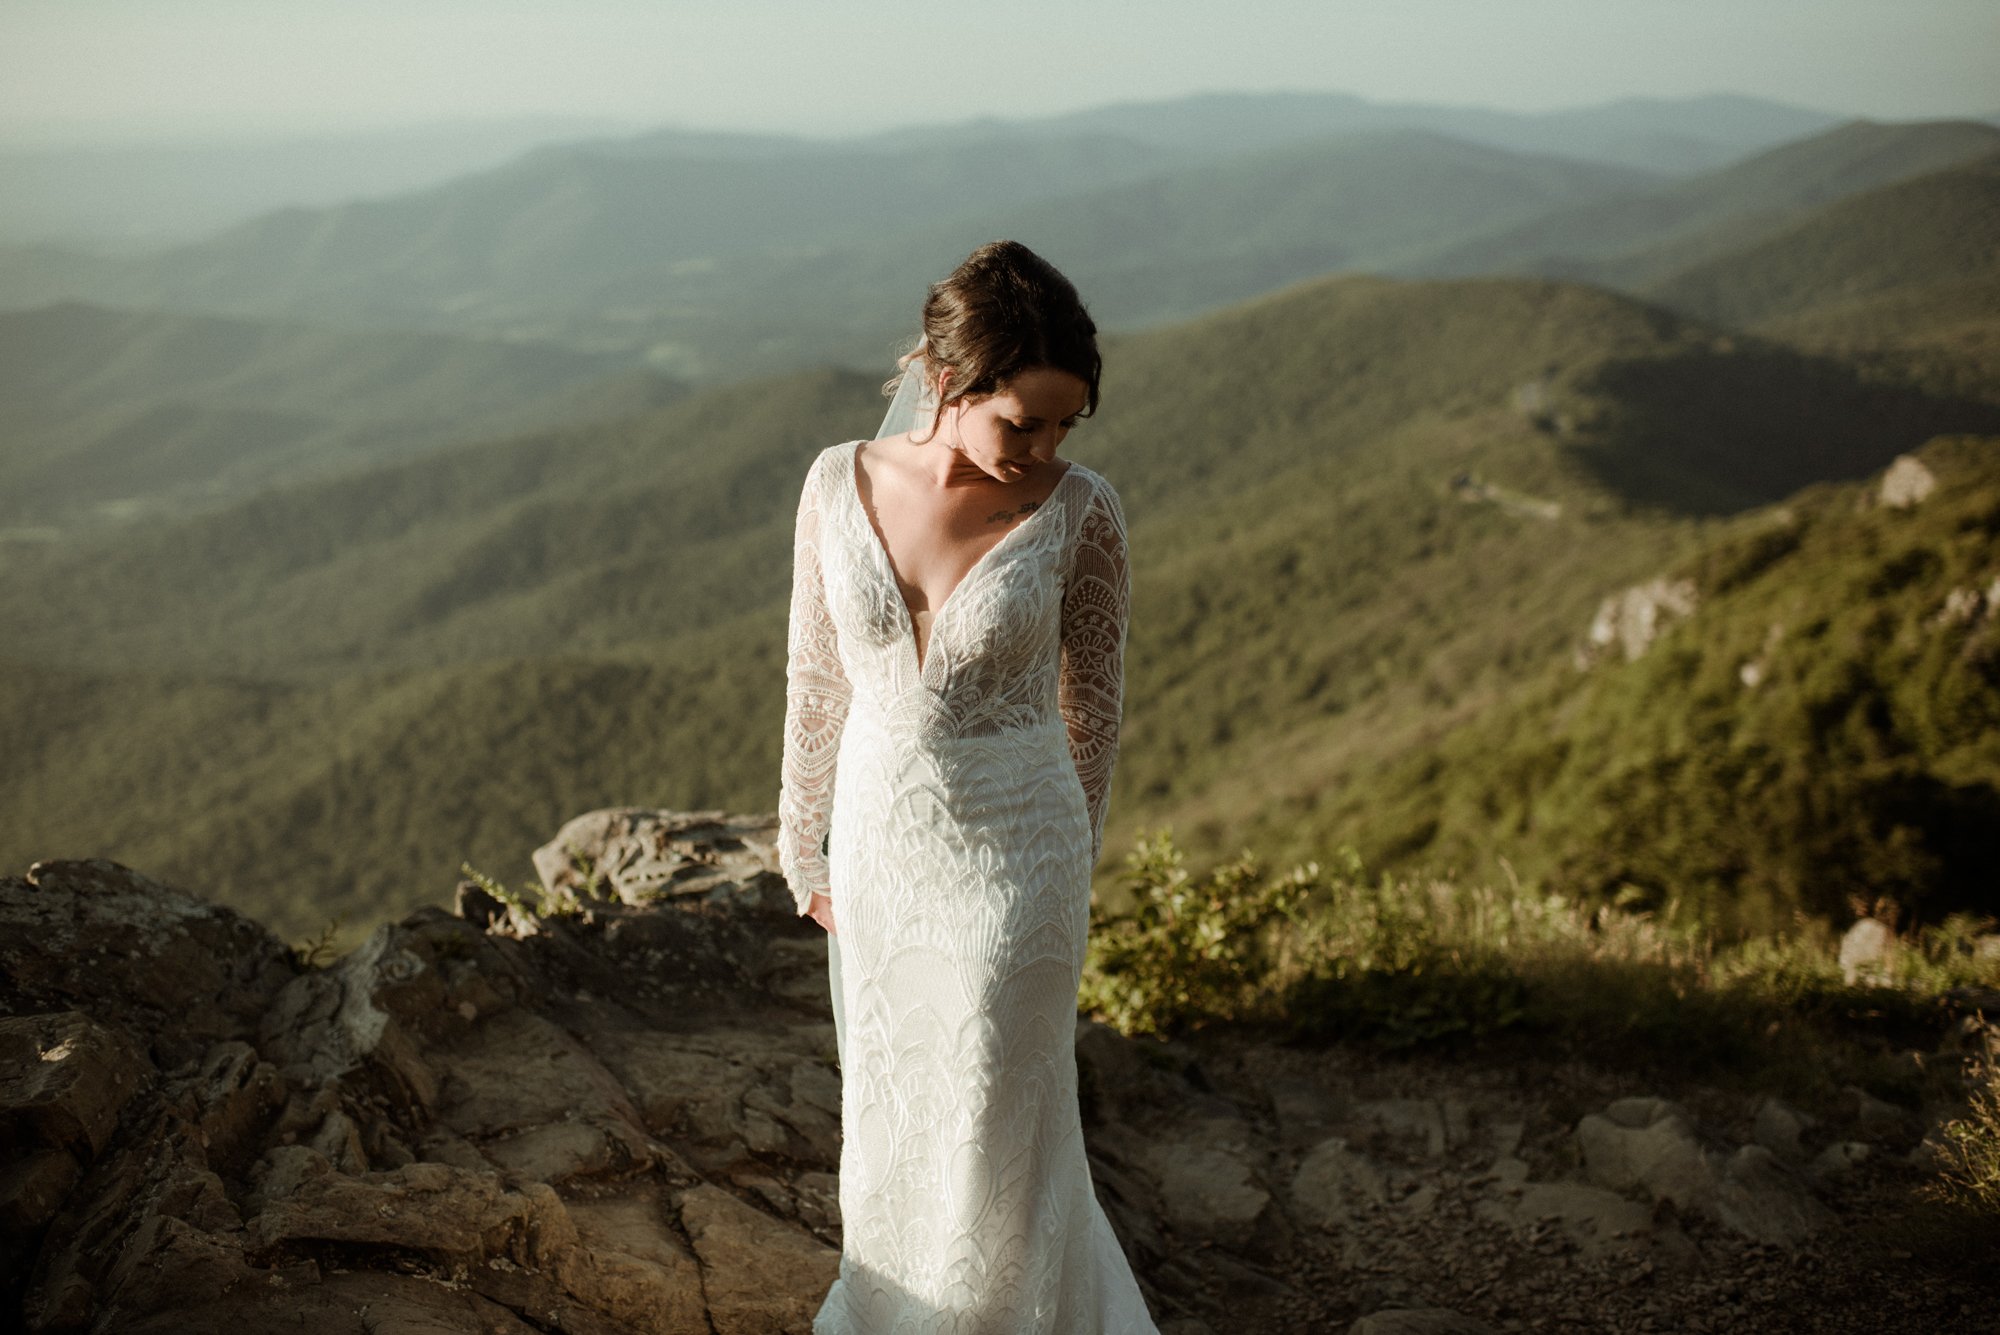 Sunset Elopement on Stony Man Summit in Shenandoah National Park - White Sails Creative Elopement Photography - July Elopement on the Blue Ridge Parkway_46.jpg